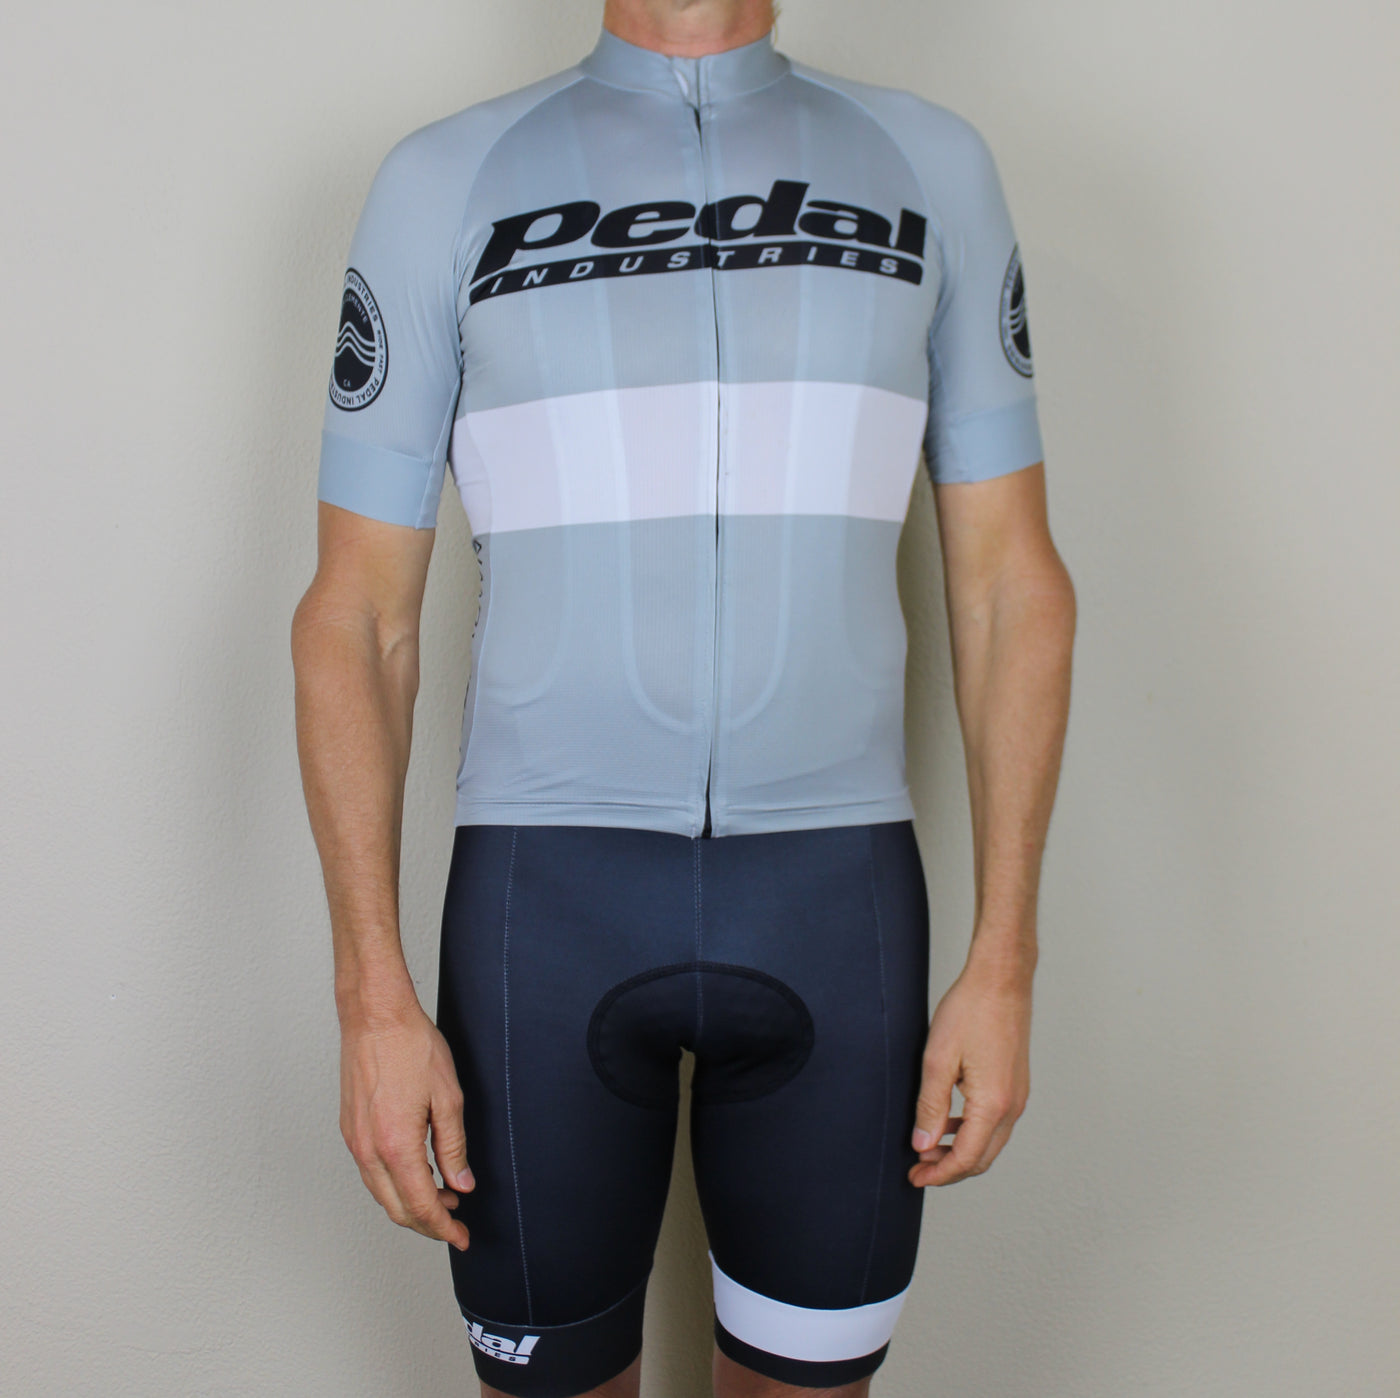 PEDAL industries '19 Team PRO JERSEY 2.0 SHORT SLEEVE - GRAY